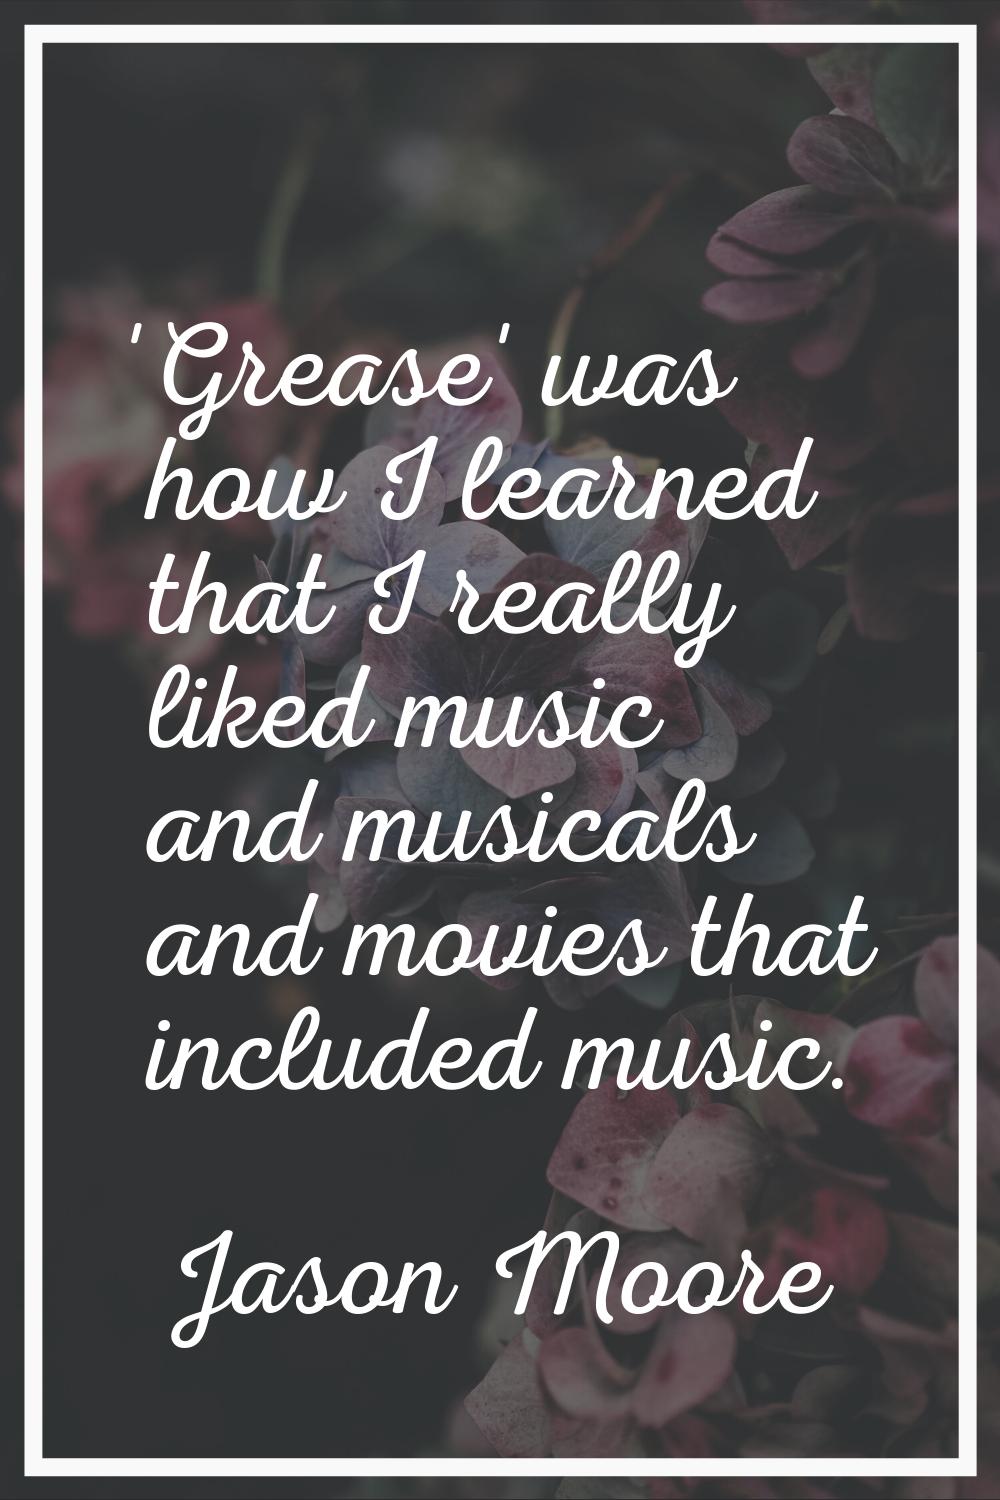 'Grease' was how I learned that I really liked music and musicals and movies that included music.